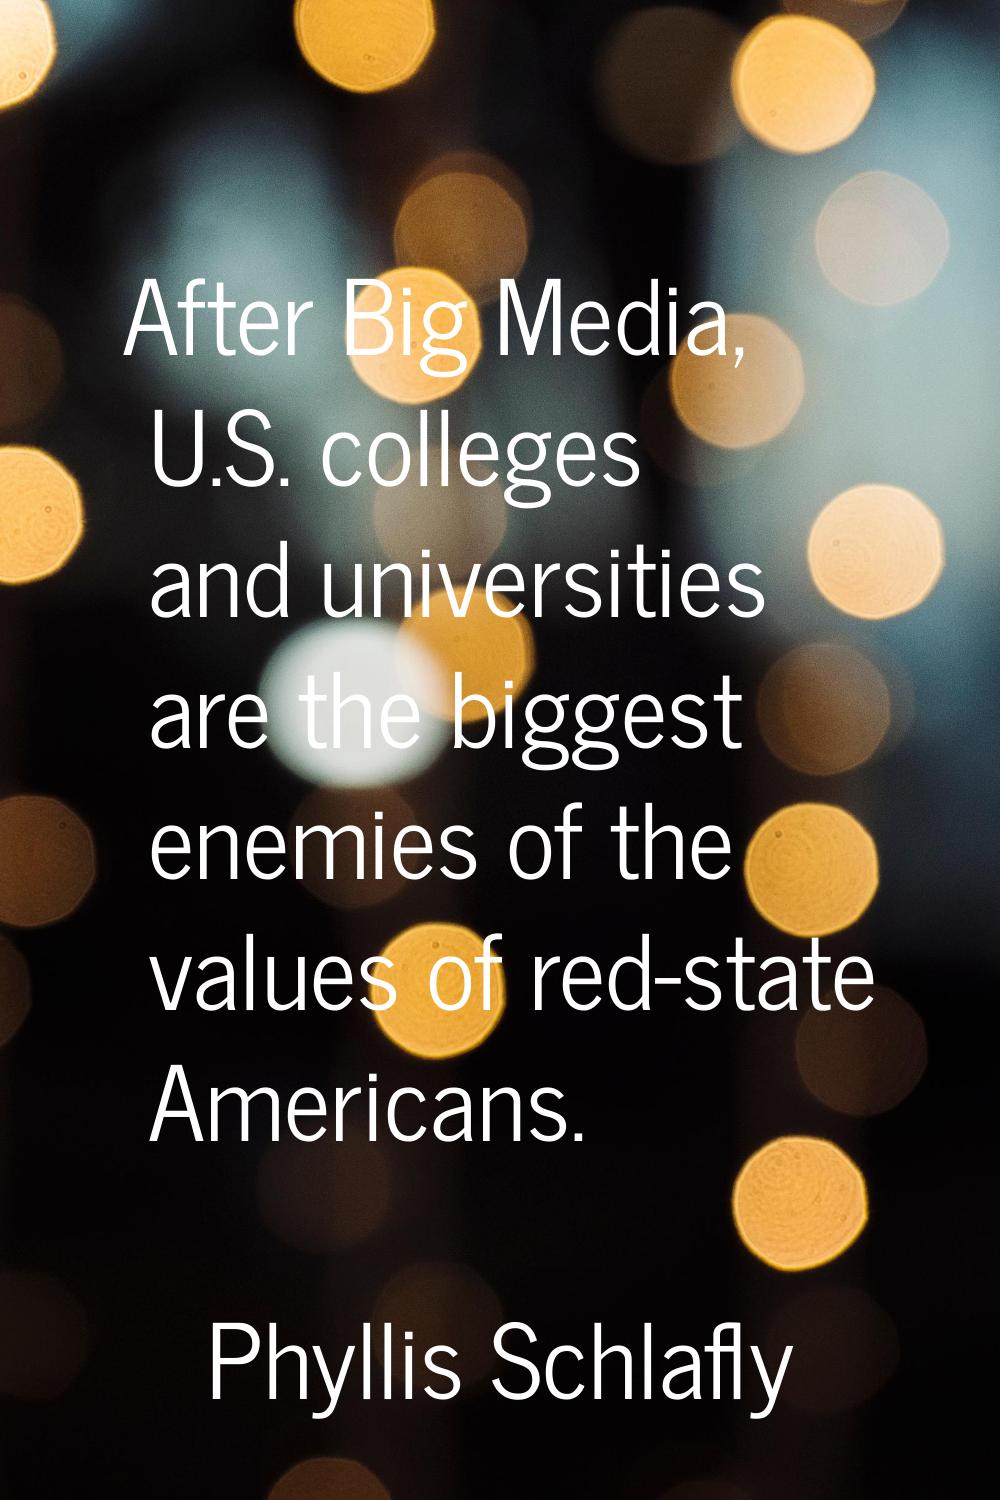 After Big Media, U.S. colleges and universities are the biggest enemies of the values of red-state 